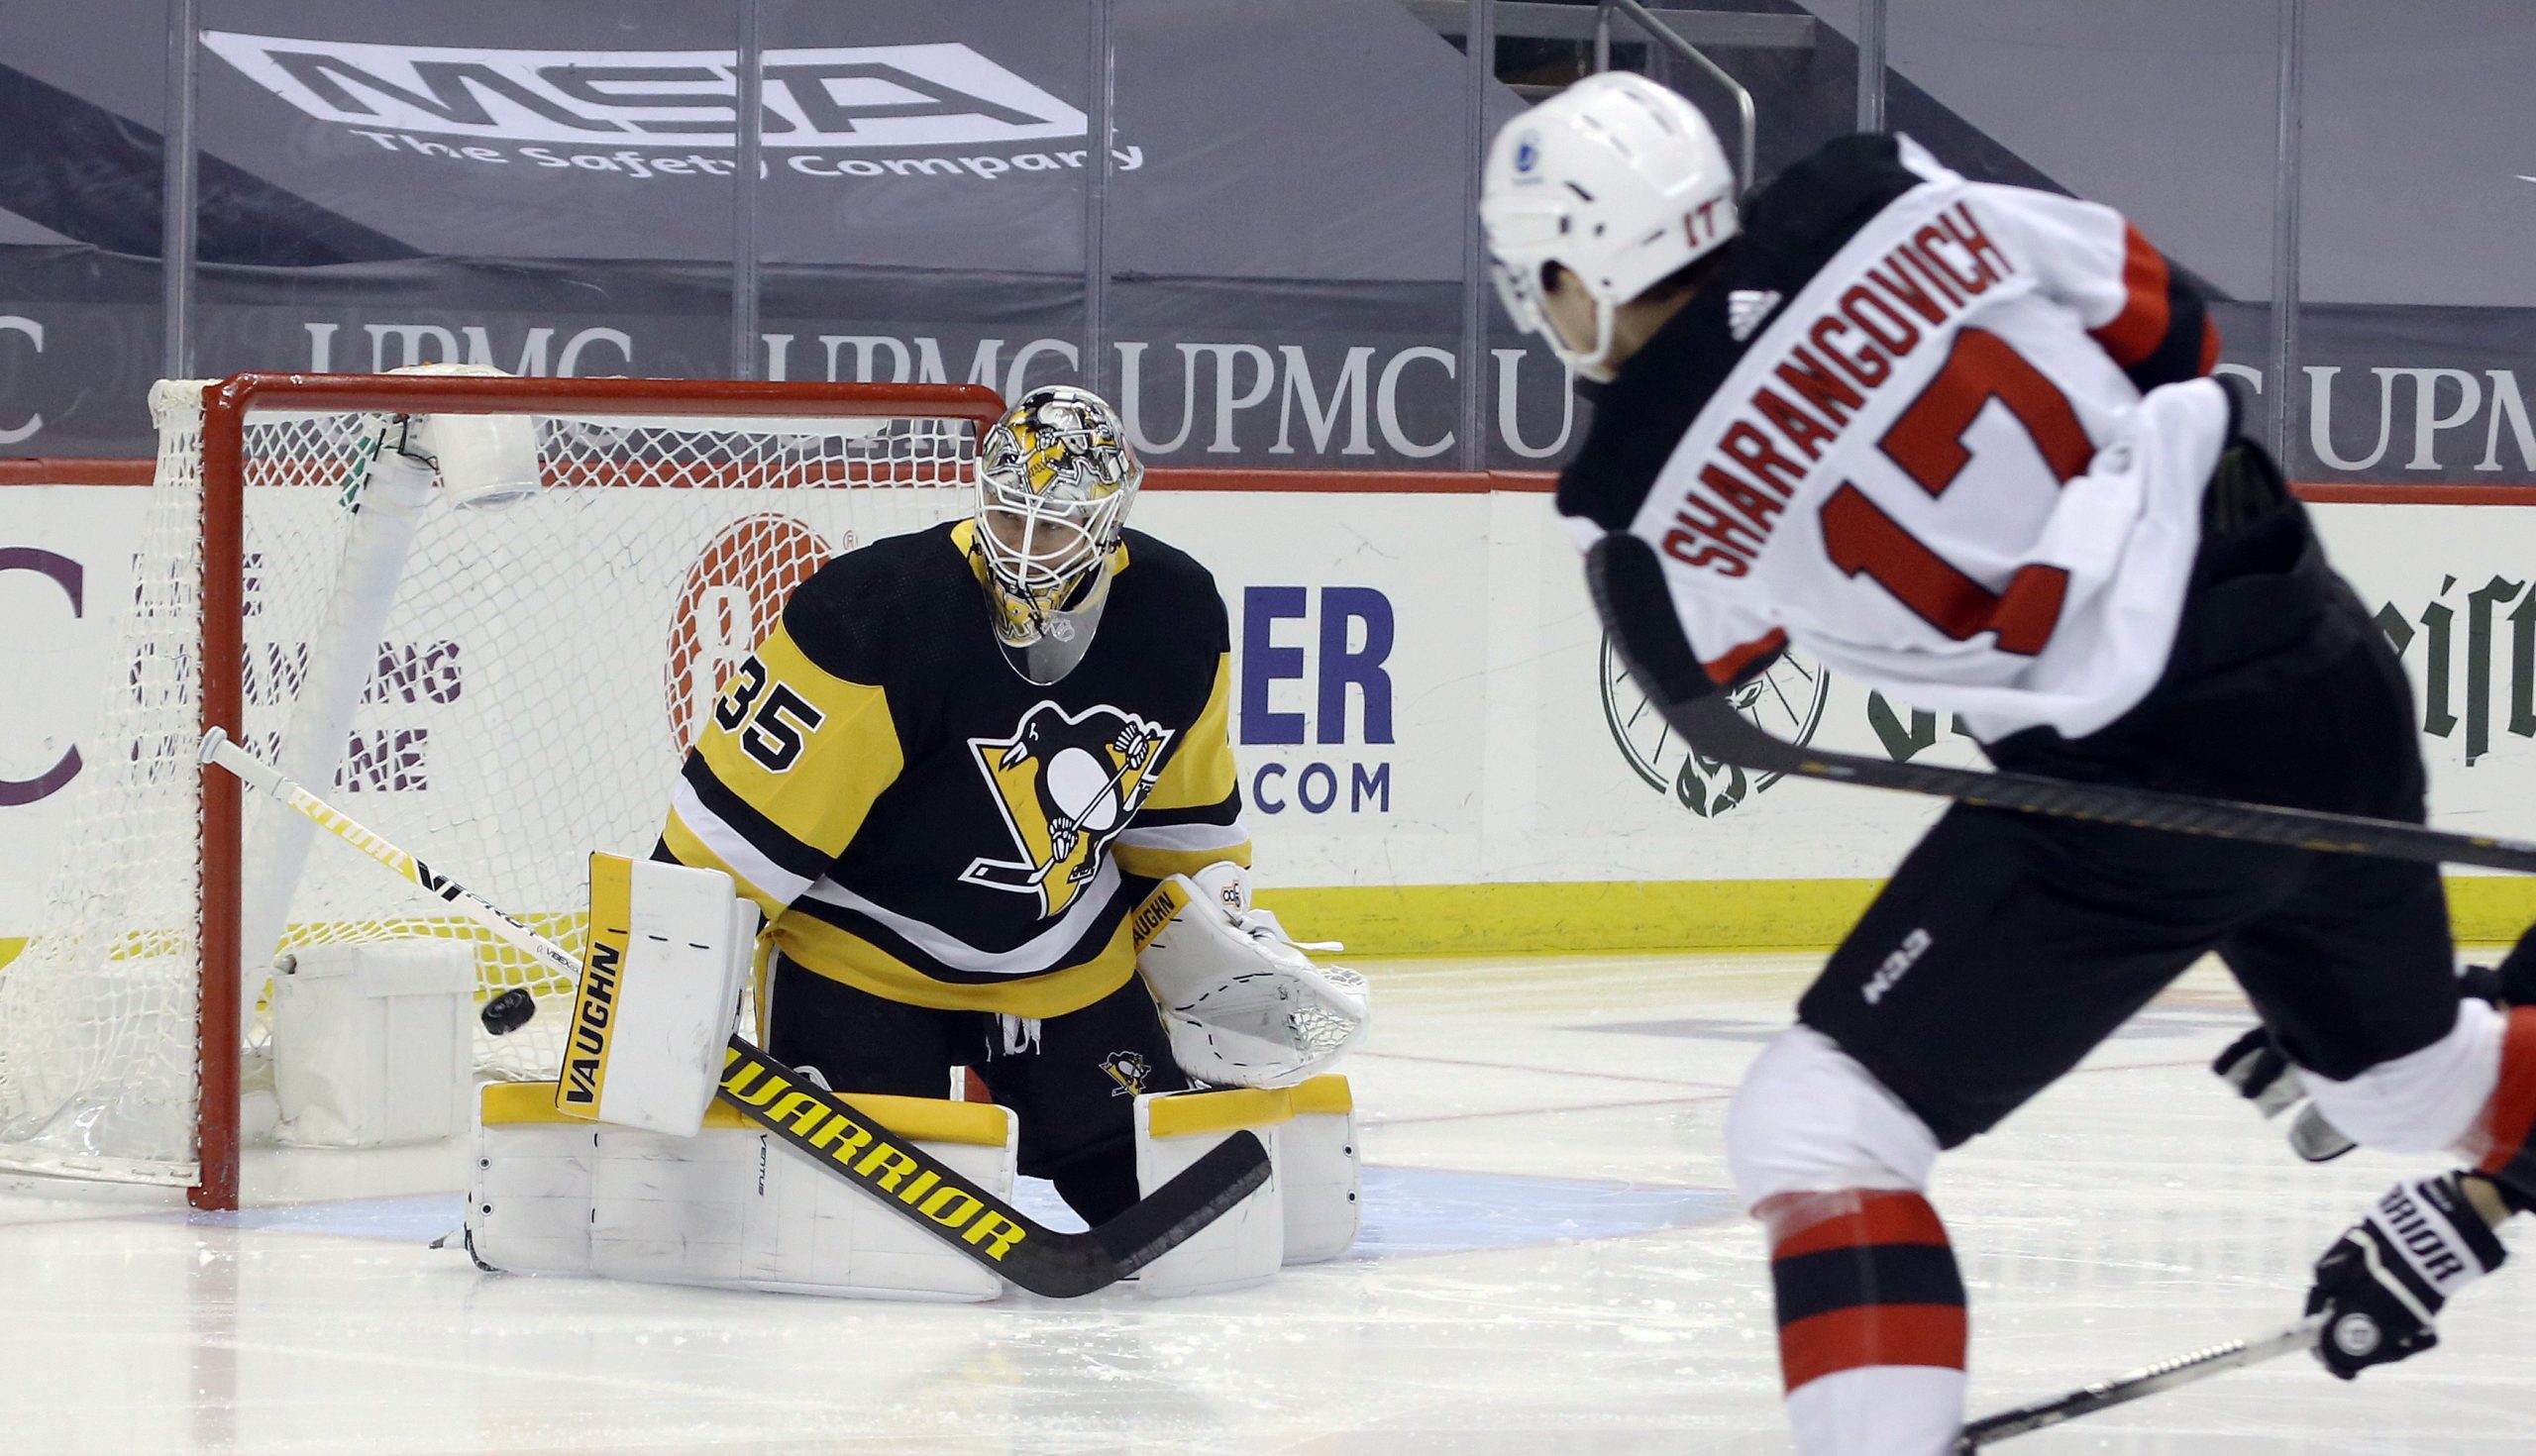 Mar 21, 2021; Pittsburgh, Pennsylvania, USA; Pittsburgh Penguins goaltender Tristan Jarry (35) makes a save against New Jersey Devils center Yegor Sharangovich (17) during the first period at PPG Paints Arena. New Jersey won 2-1 in overtime.